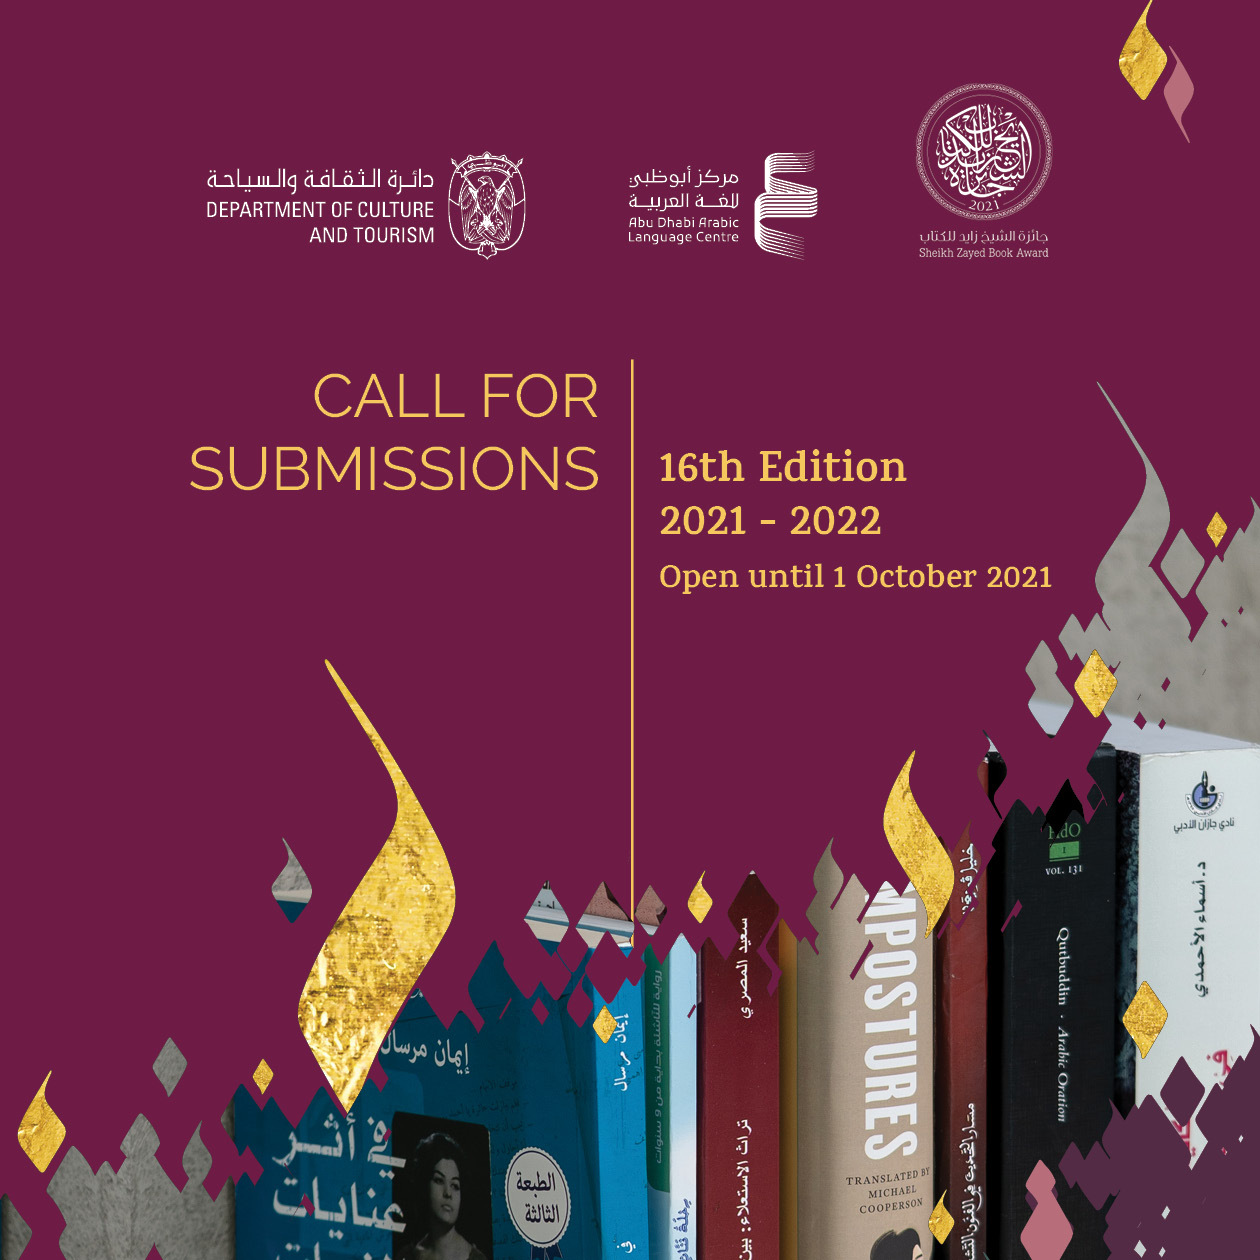 Sheikh Zayed Book Award Invites Entrants For 16th Edition